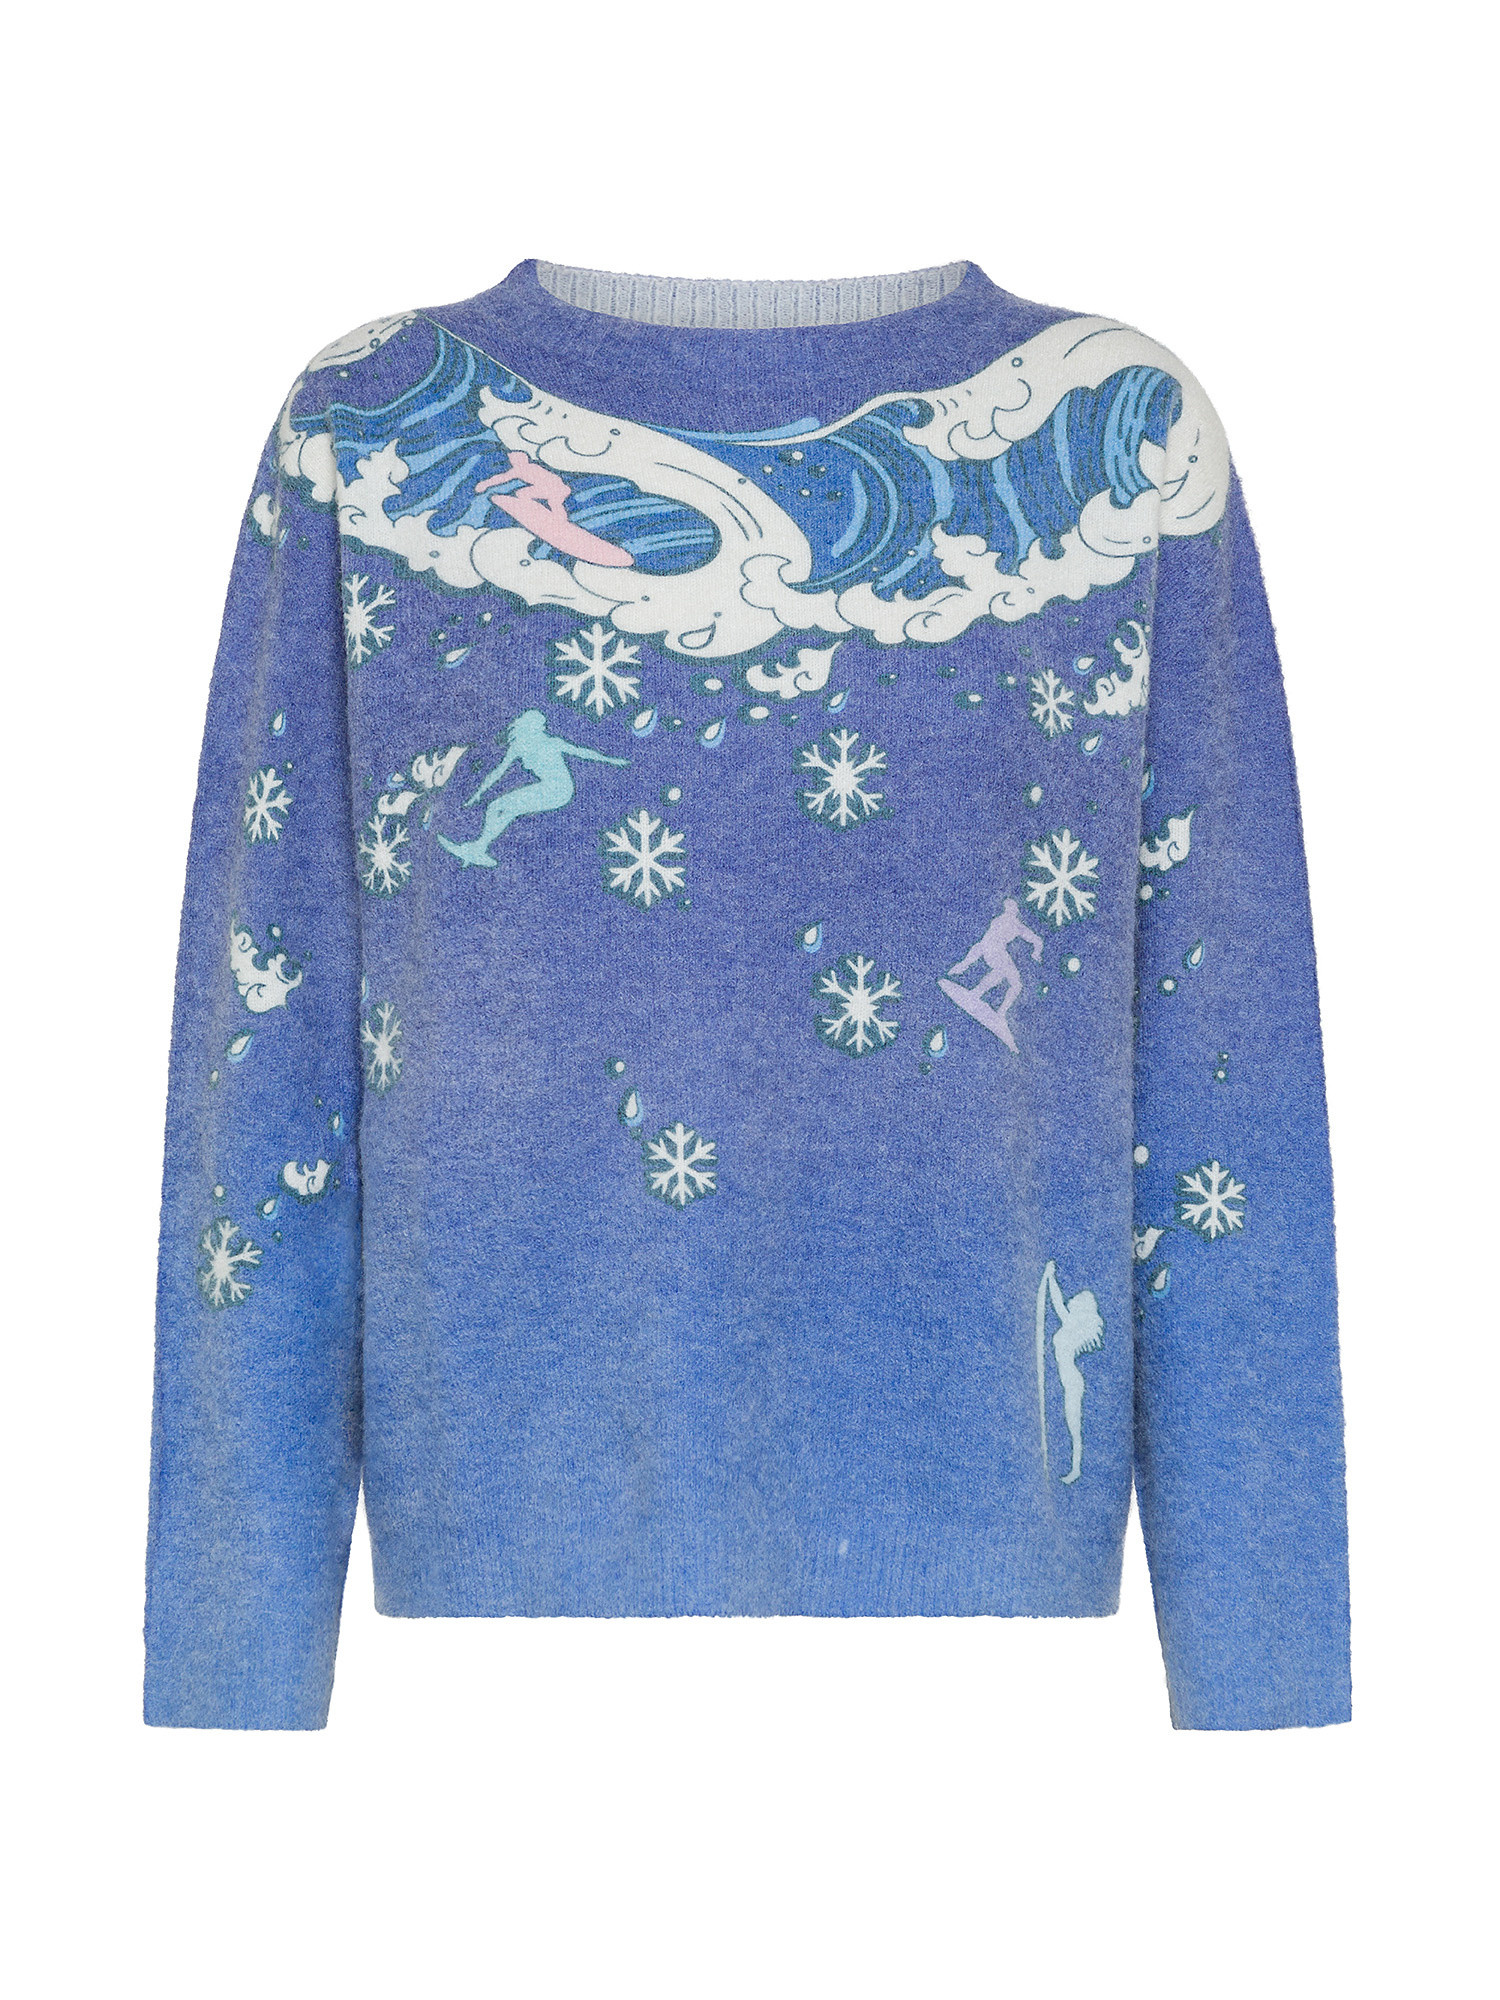 Pullover The Surfer’s Christmas by Paula Cademartori, Blu, large image number 0